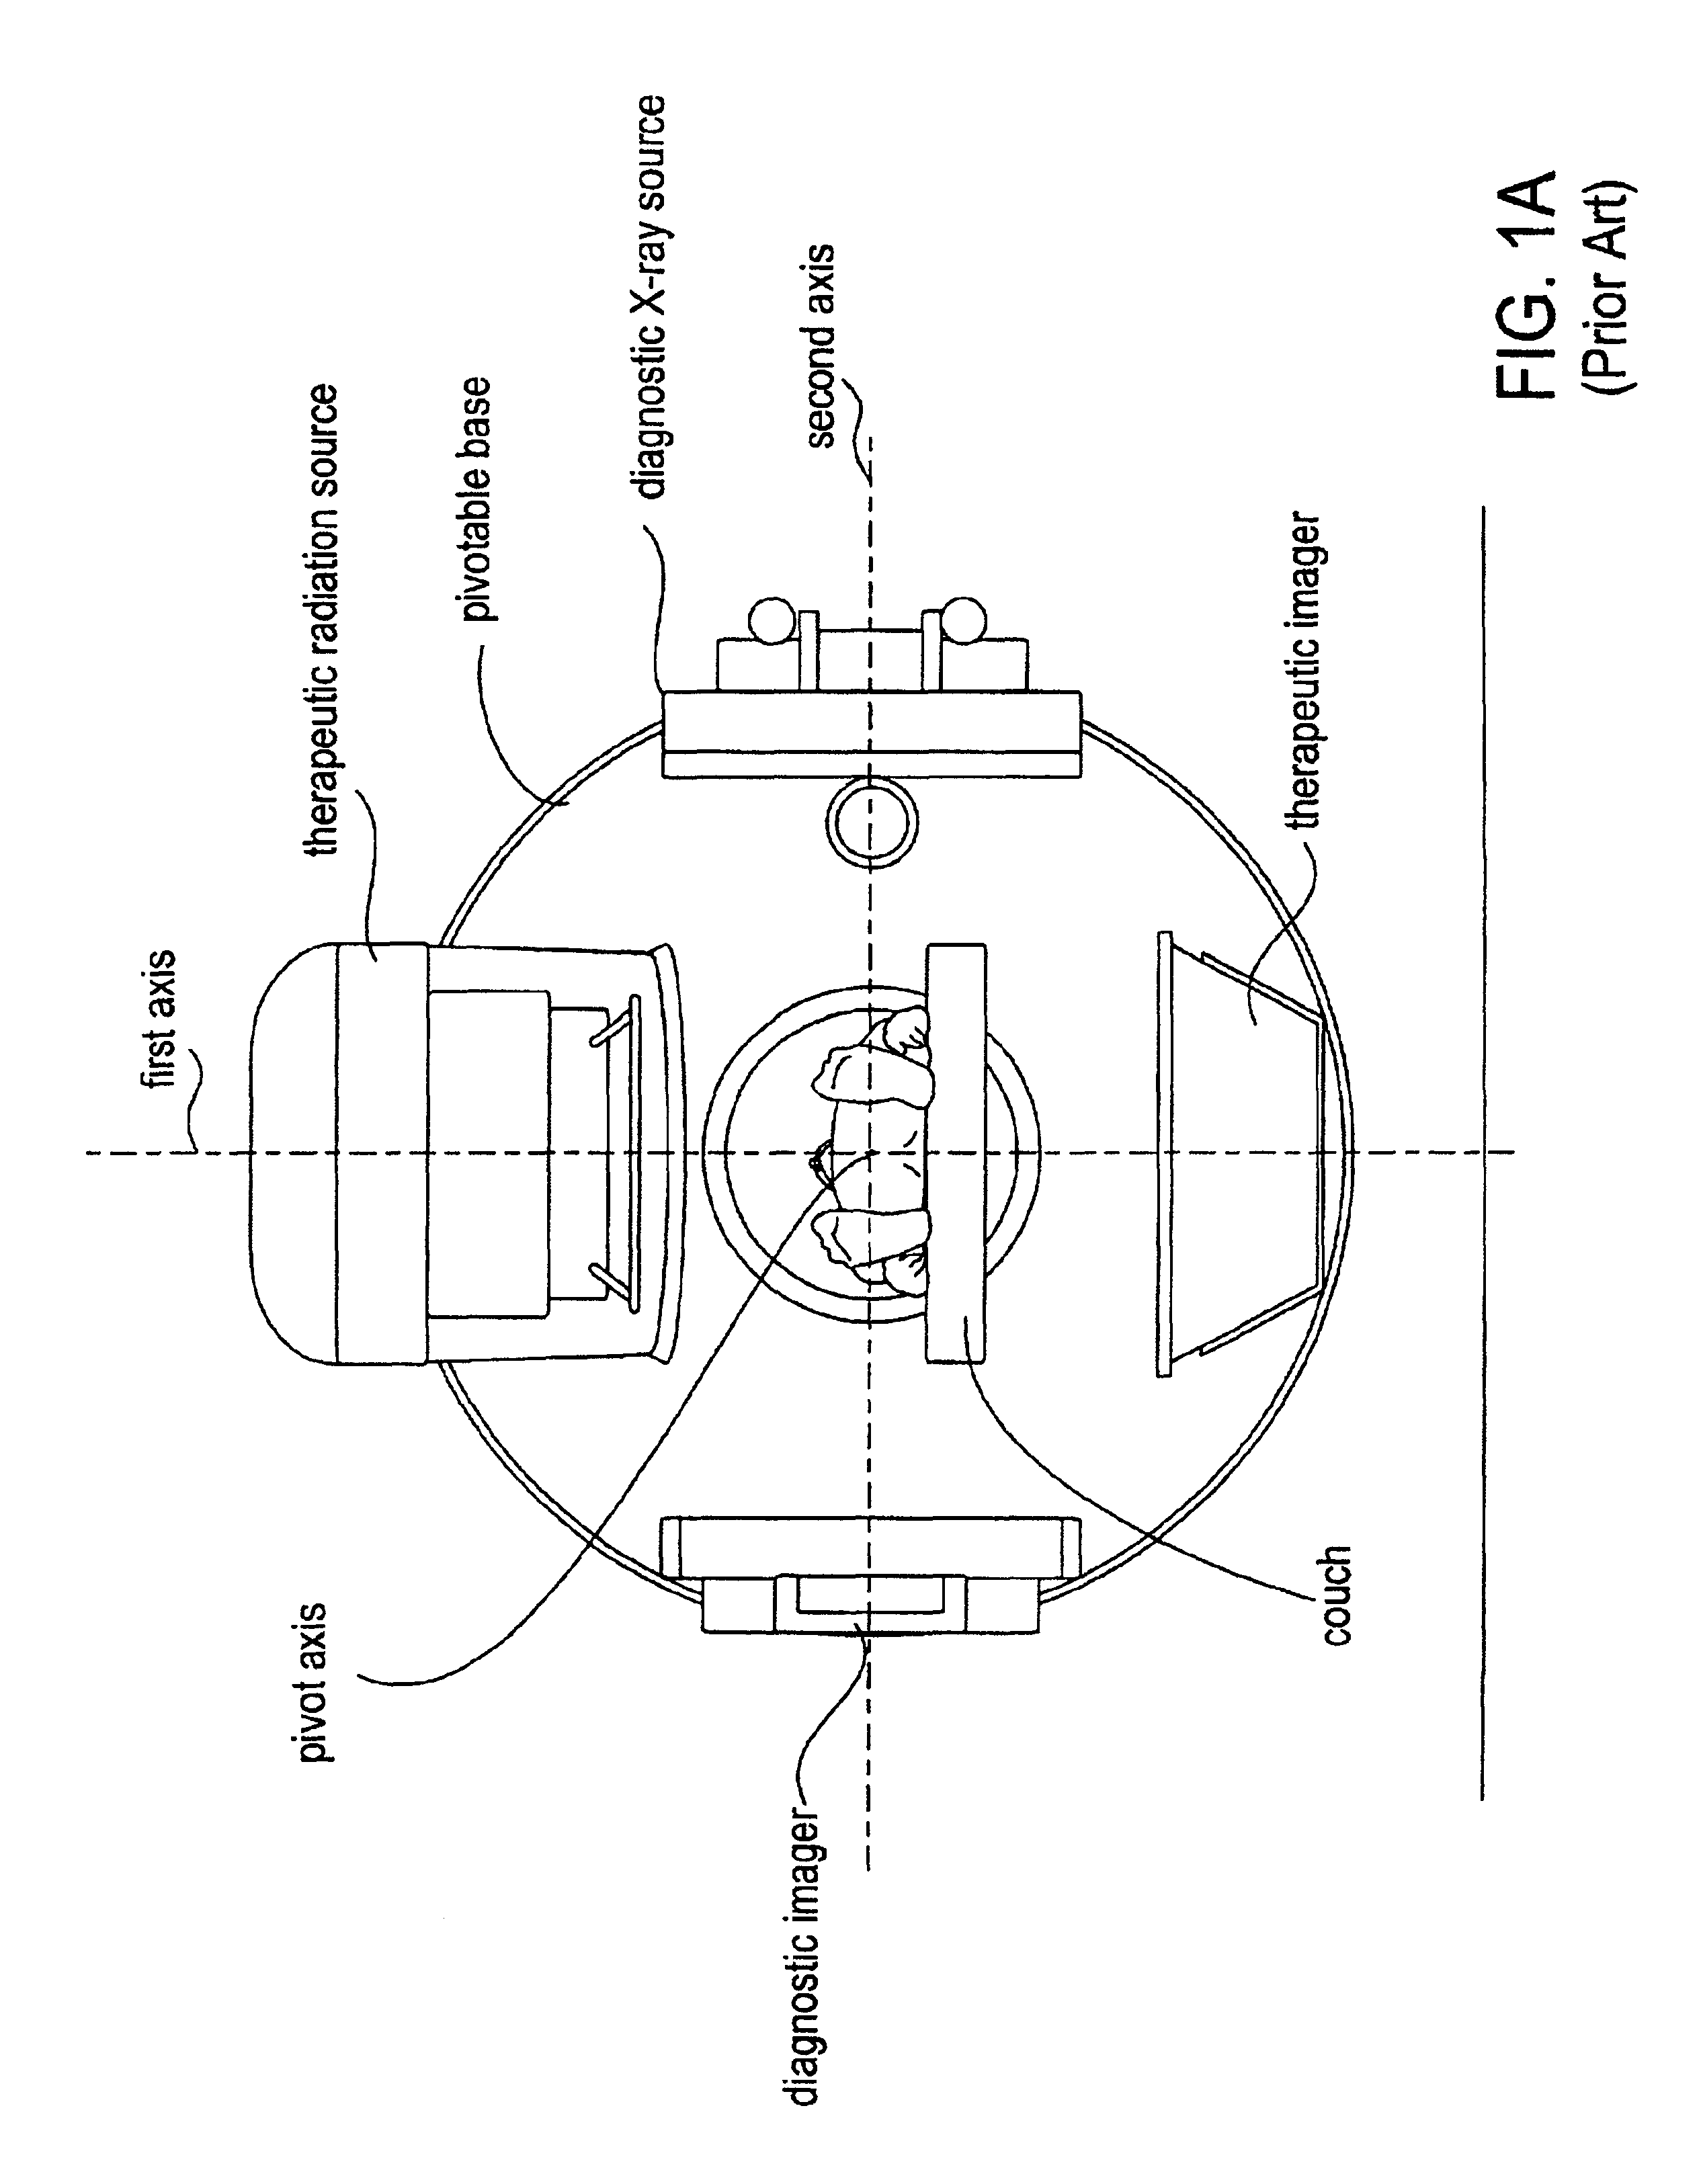 Radiotherapy apparatus equipped with an articulable gantry for positioning an imaging unit